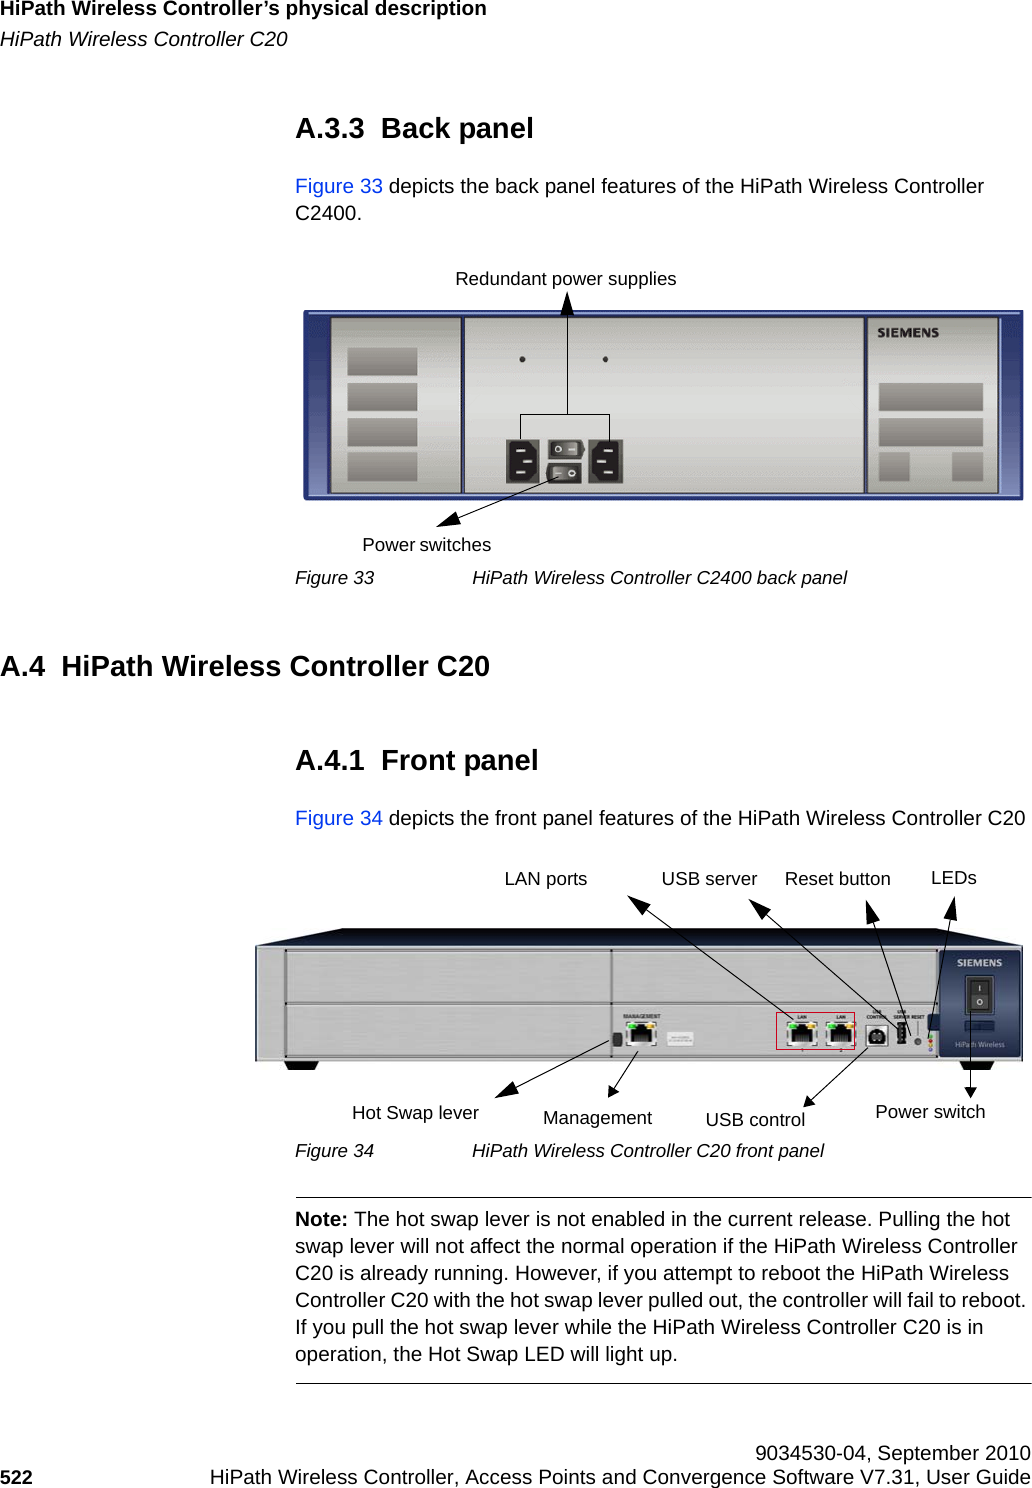 HiPath Wireless Controller’s physical descriptionhwc_appendixa.fmHiPath Wireless Controller C20 9034530-04, September 2010522 HiPath Wireless Controller, Access Points and Convergence Software V7.31, User Guide        A.3.3  Back panelFigure 33 depicts the back panel features of the HiPath Wireless Controller C2400.Figure 33 HiPath Wireless Controller C2400 back panelA.4  HiPath Wireless Controller C20A.4.1  Front panelFigure 34 depicts the front panel features of the HiPath Wireless Controller C20Figure 34 HiPath Wireless Controller C20 front panelNote: The hot swap lever is not enabled in the current release. Pulling the hot swap lever will not affect the normal operation if the HiPath Wireless Controller C20 is already running. However, if you attempt to reboot the HiPath Wireless Controller C20 with the hot swap lever pulled out, the controller will fail to reboot. If you pull the hot swap lever while the HiPath Wireless Controller C20 is in operation, the Hot Swap LED will light up.Redundant power suppliesPower switchesLAN portsManagementLEDsUSB serverUSB control Power switchReset buttonHot Swap lever